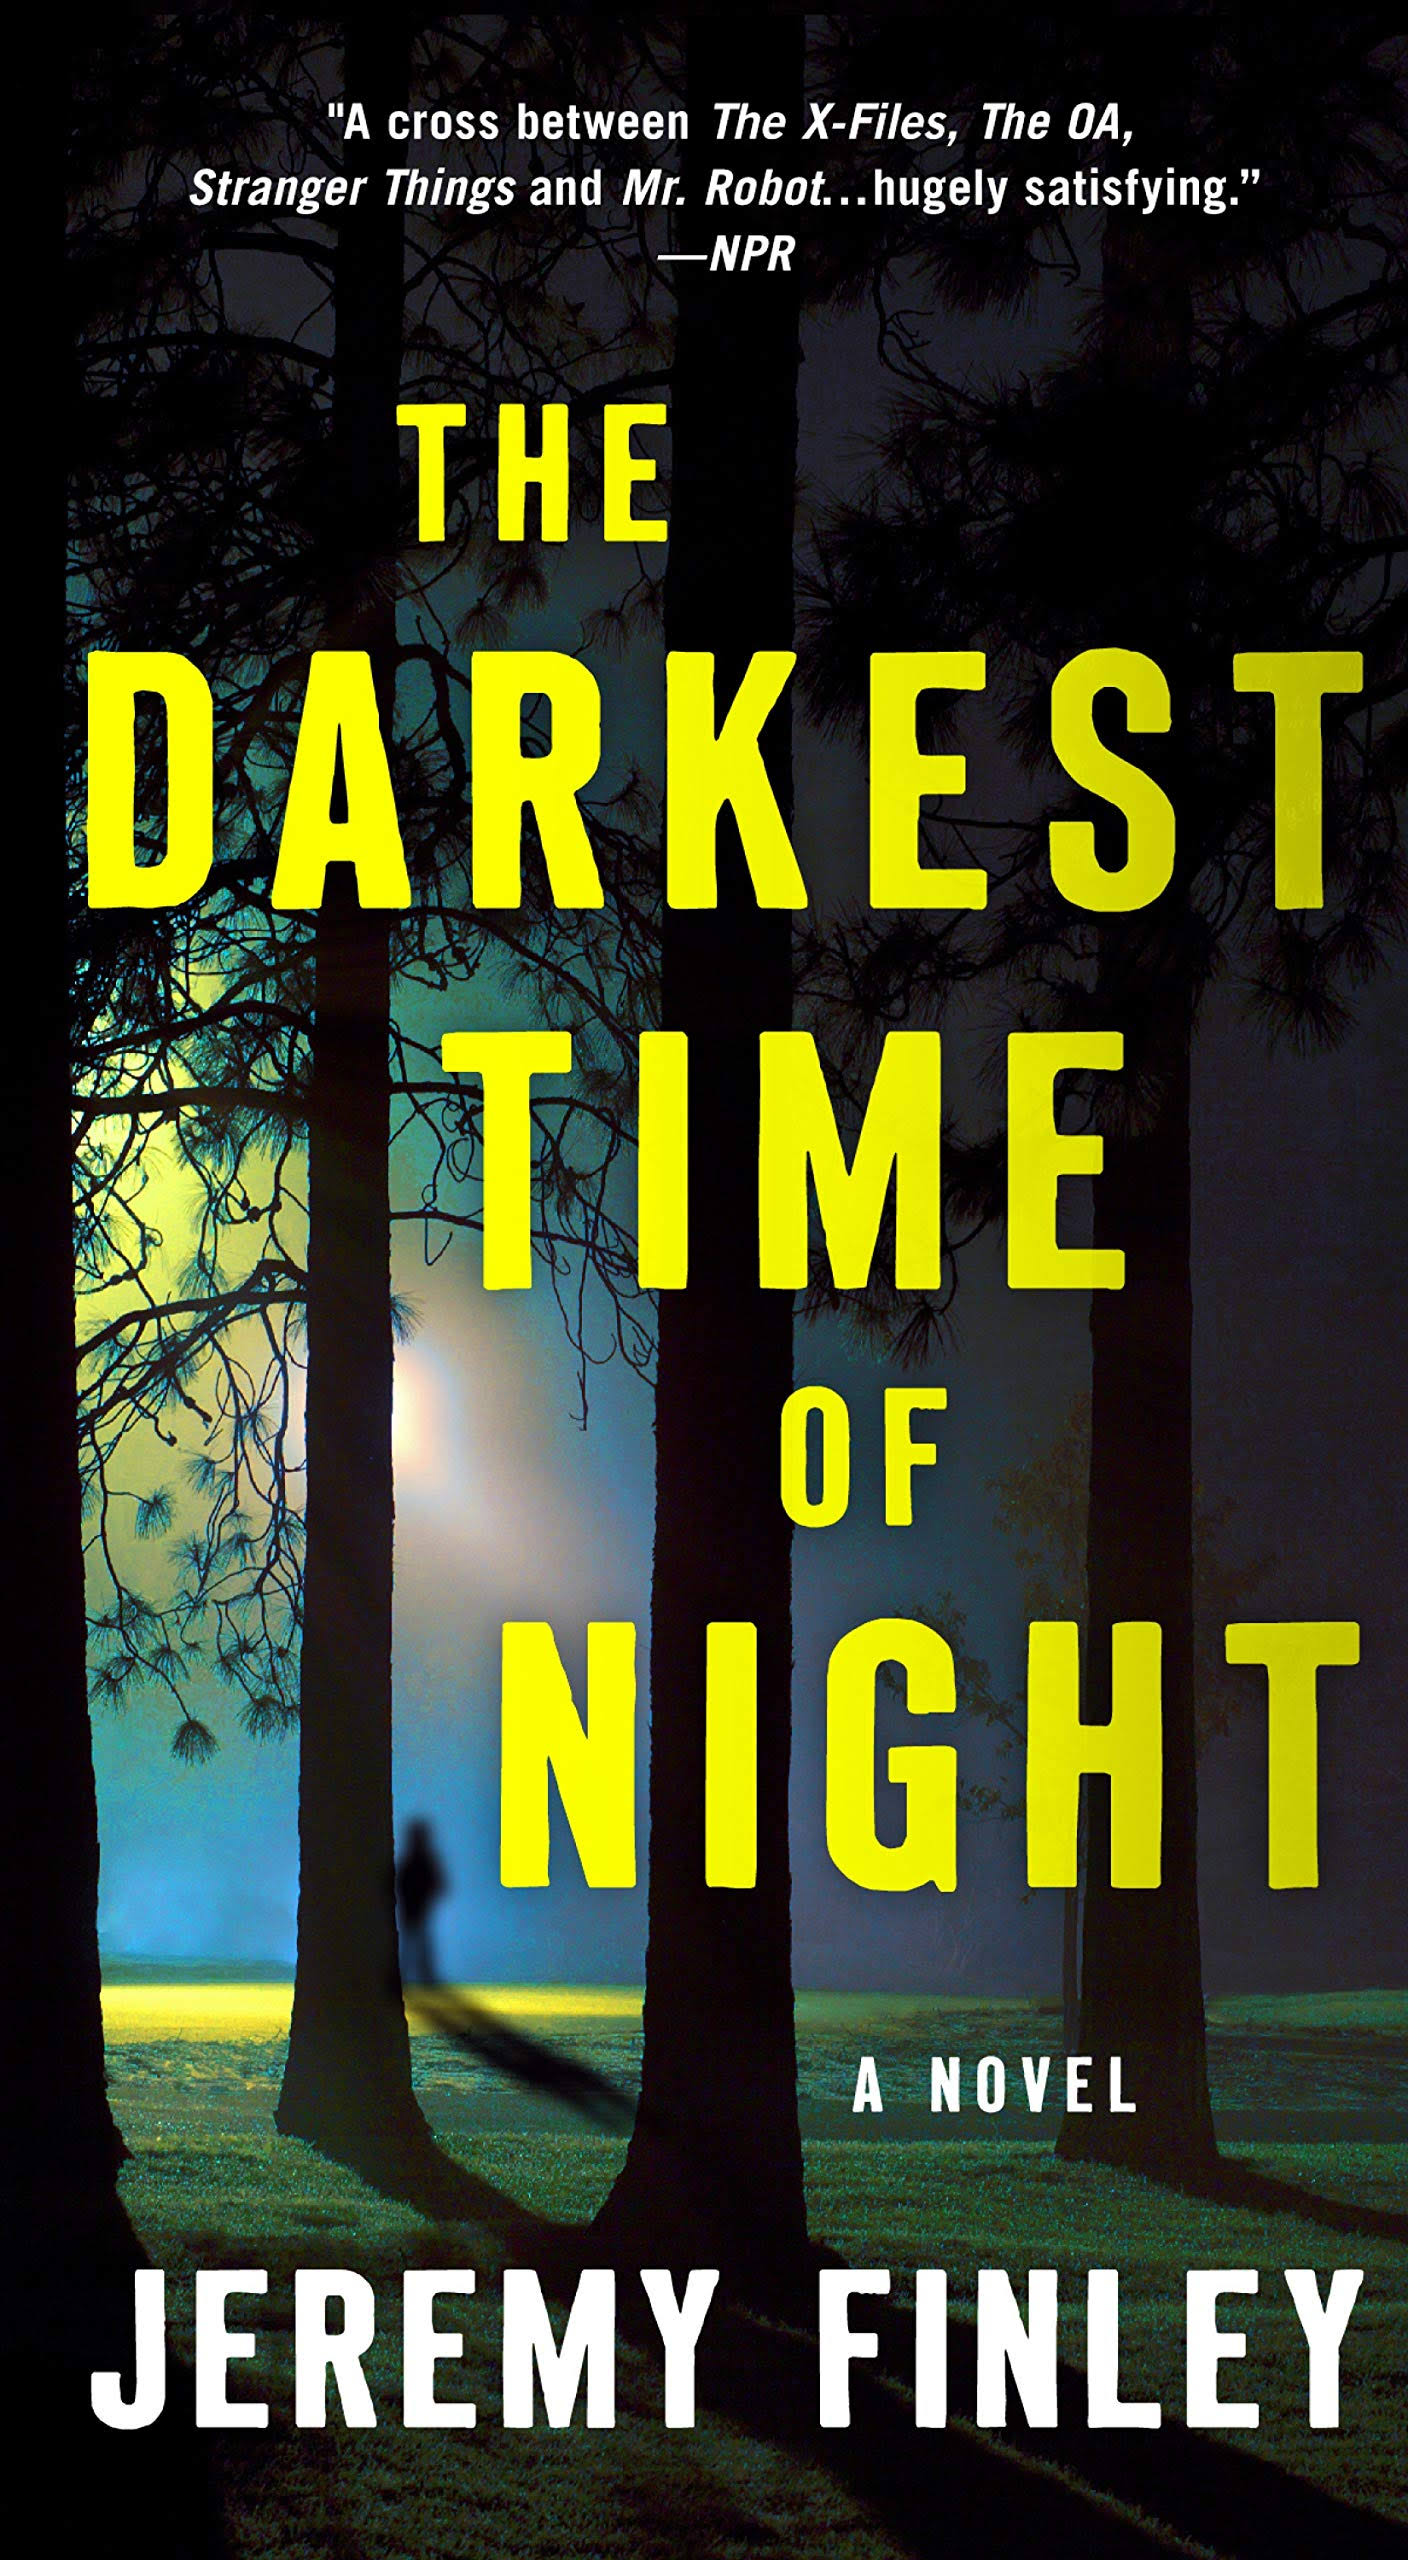 The Darkest Time of Night: A Novel [Book]